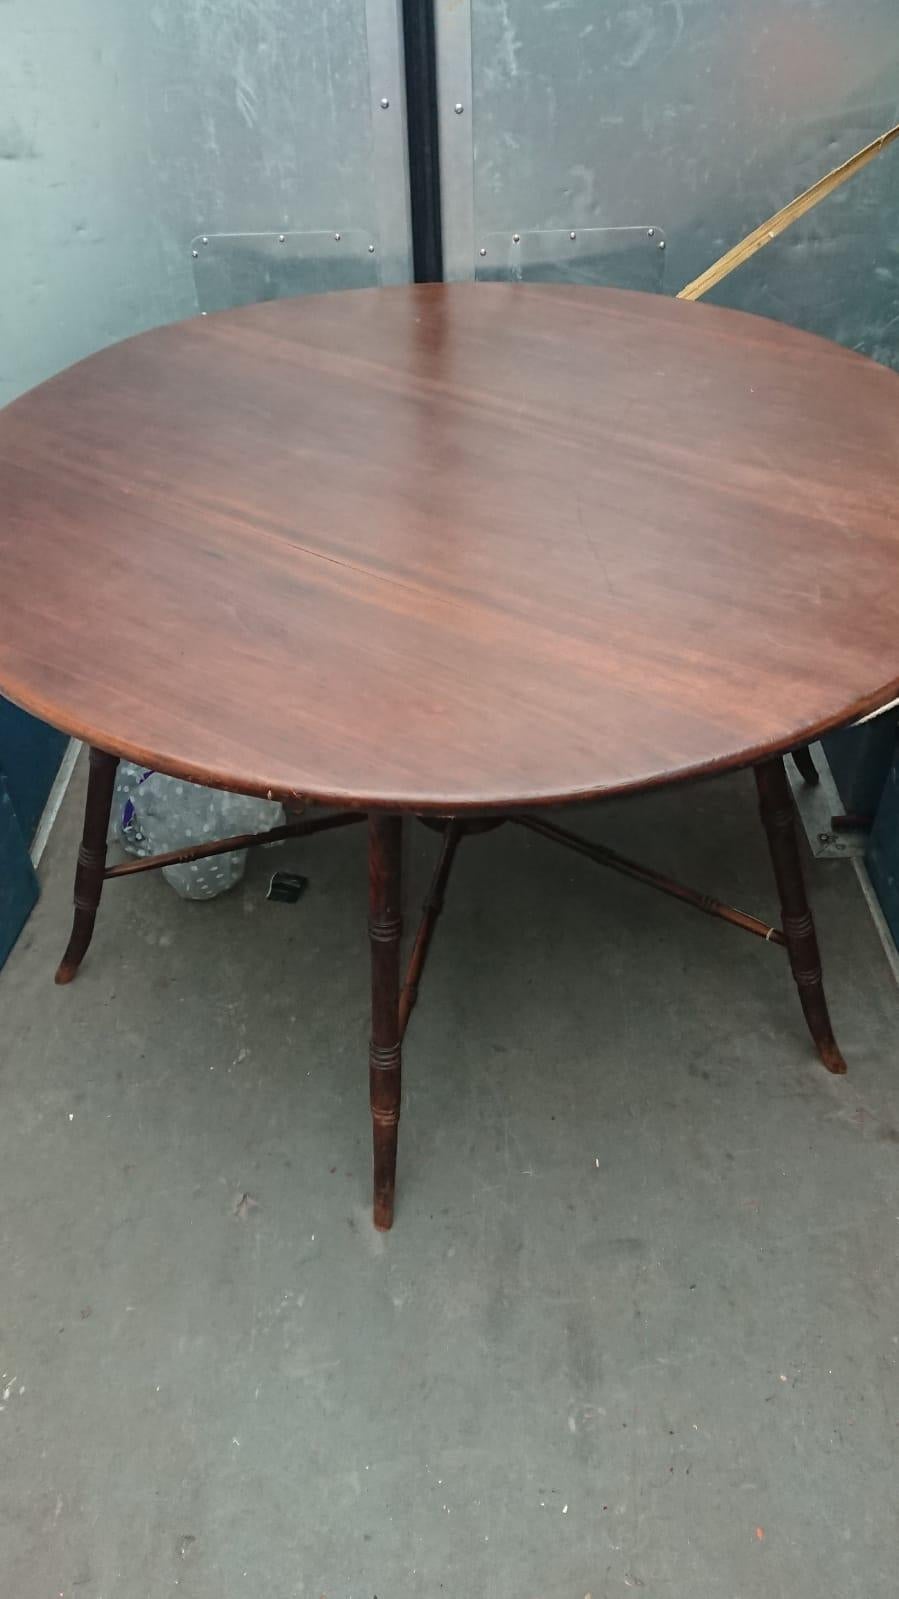 E W Godwin, attributed. Probably made by Collinson and Lock. 
An Anglo-Japanese Aesthetic Movement walnut centre or dining table, with a large circular top with a shaped apron below, on six flaring turned legs, united by six radiating spoke